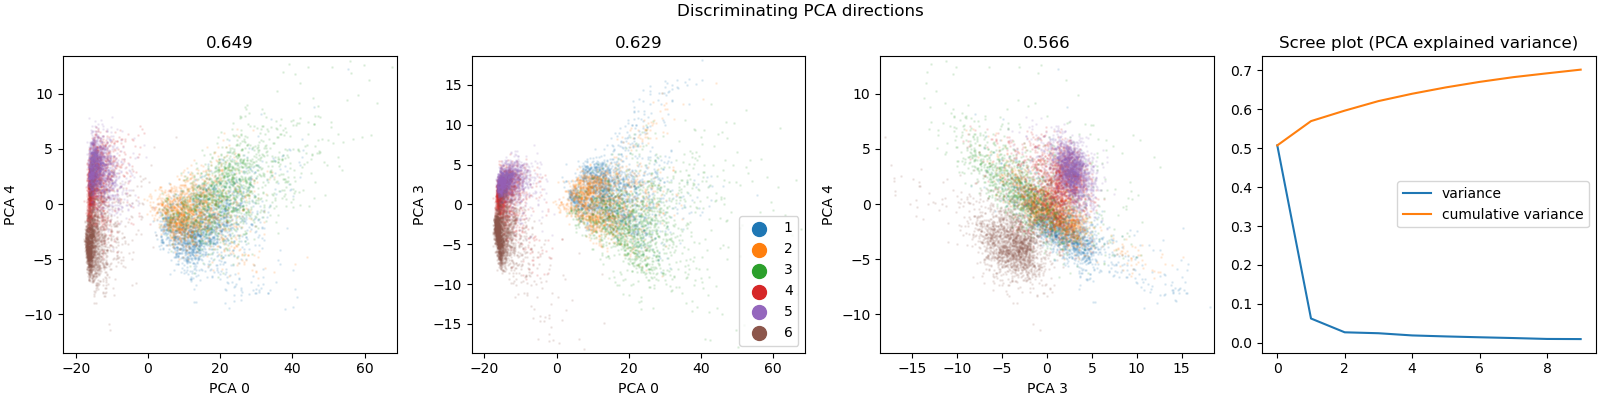 Discriminating PCA directions, 0.649, 0.629, 0.566, Scree plot (PCA explained variance)